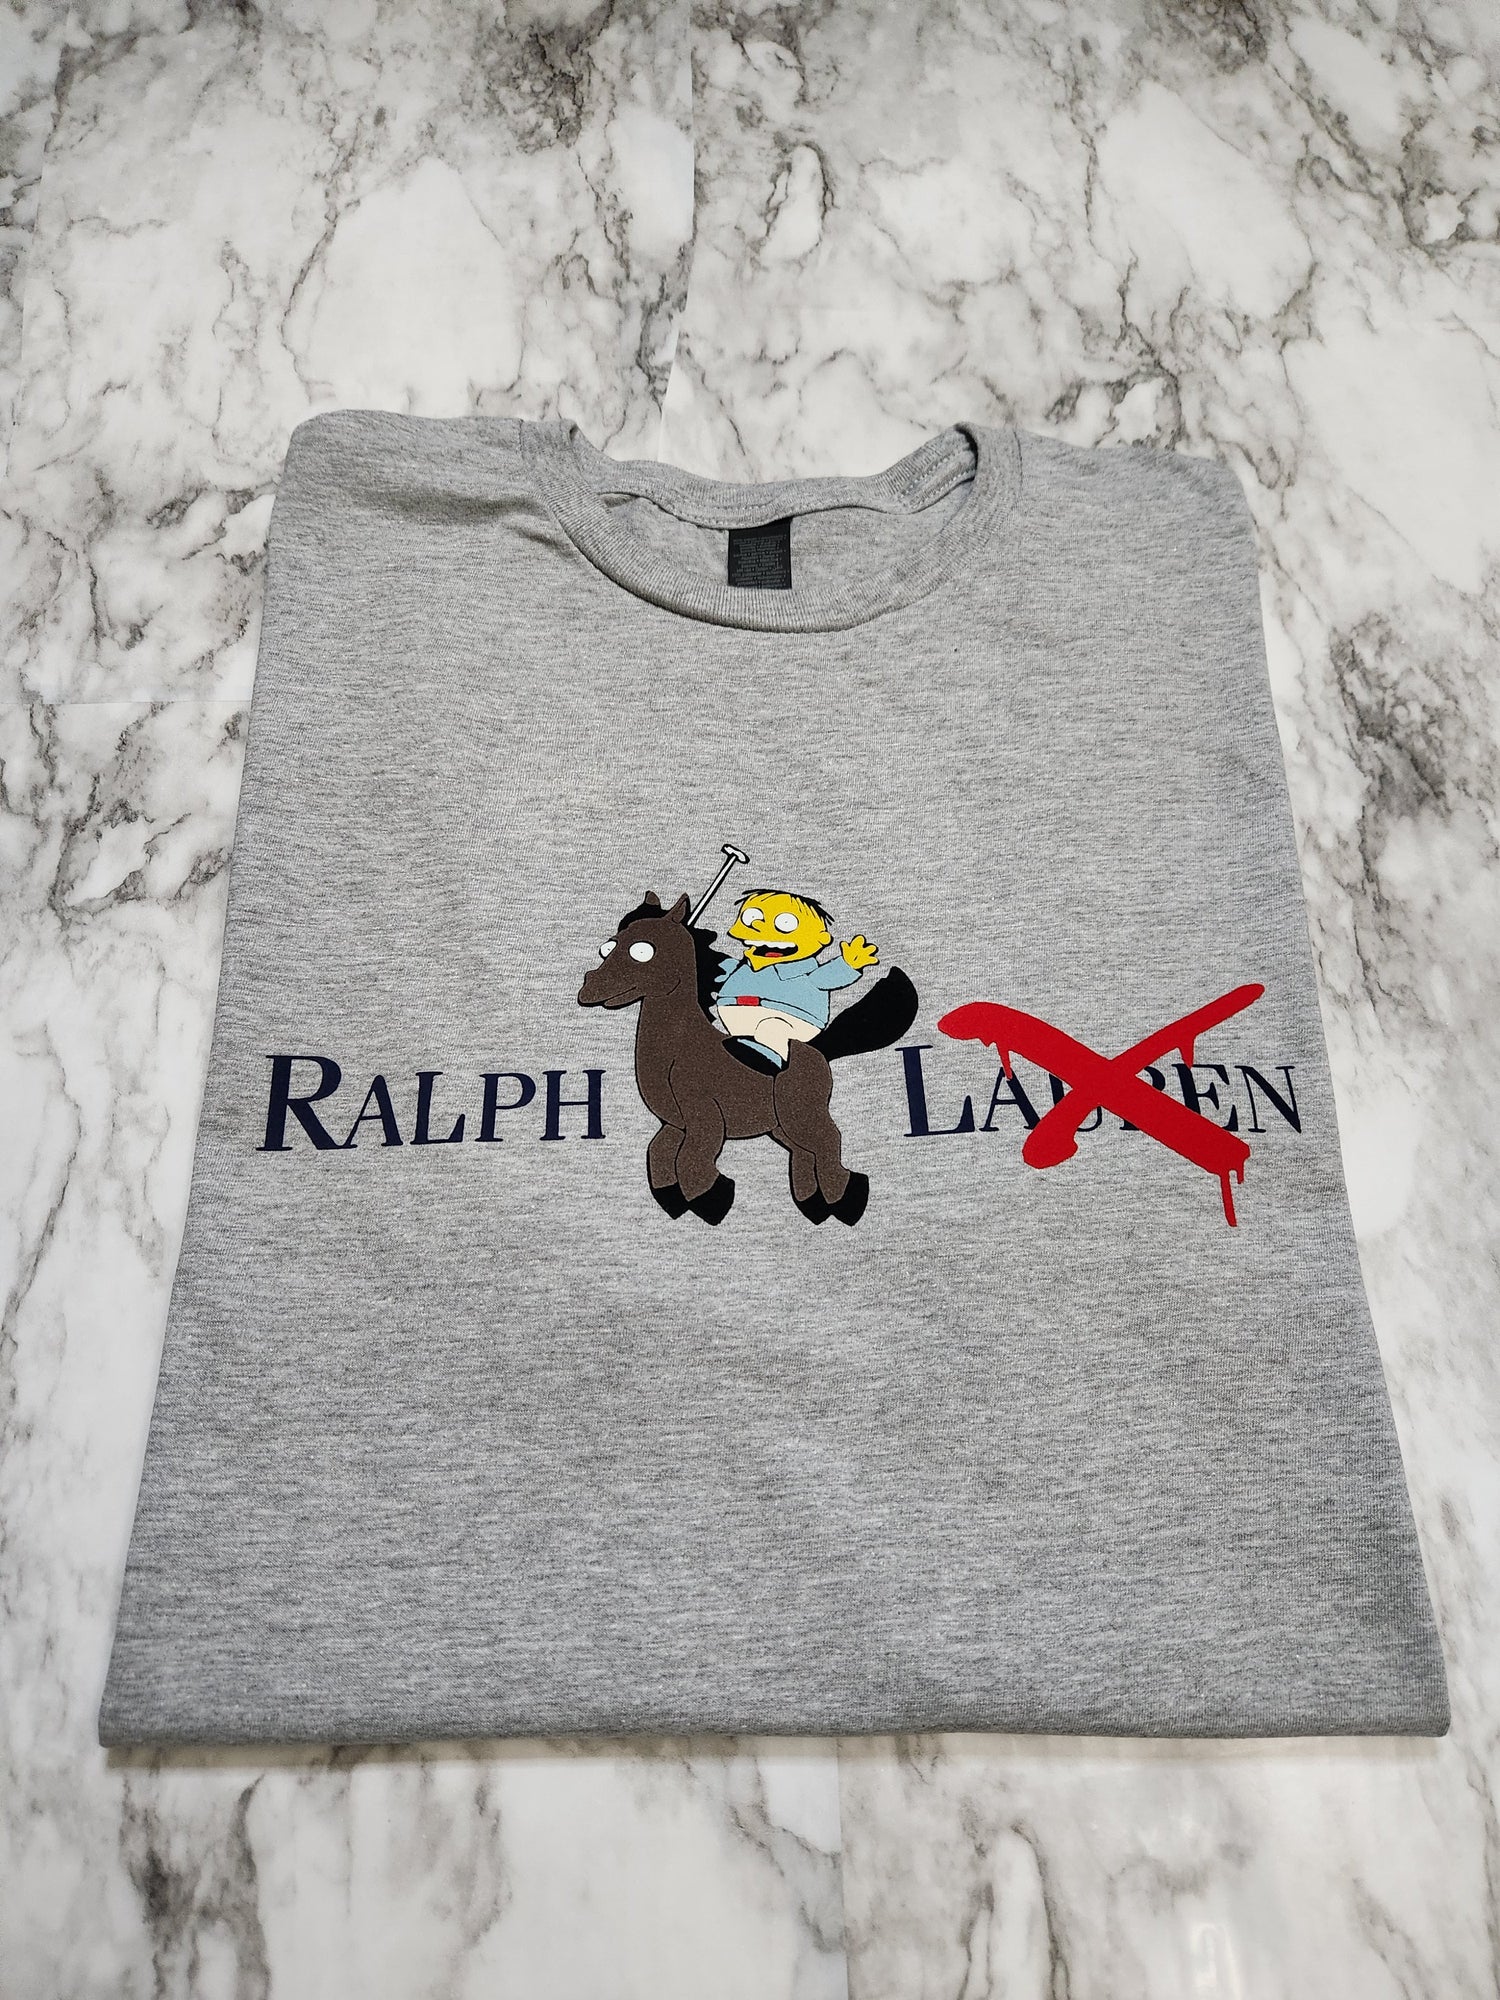 It Ain't Ralph Tho T-Shirt - Centre Ave Clothing Co.